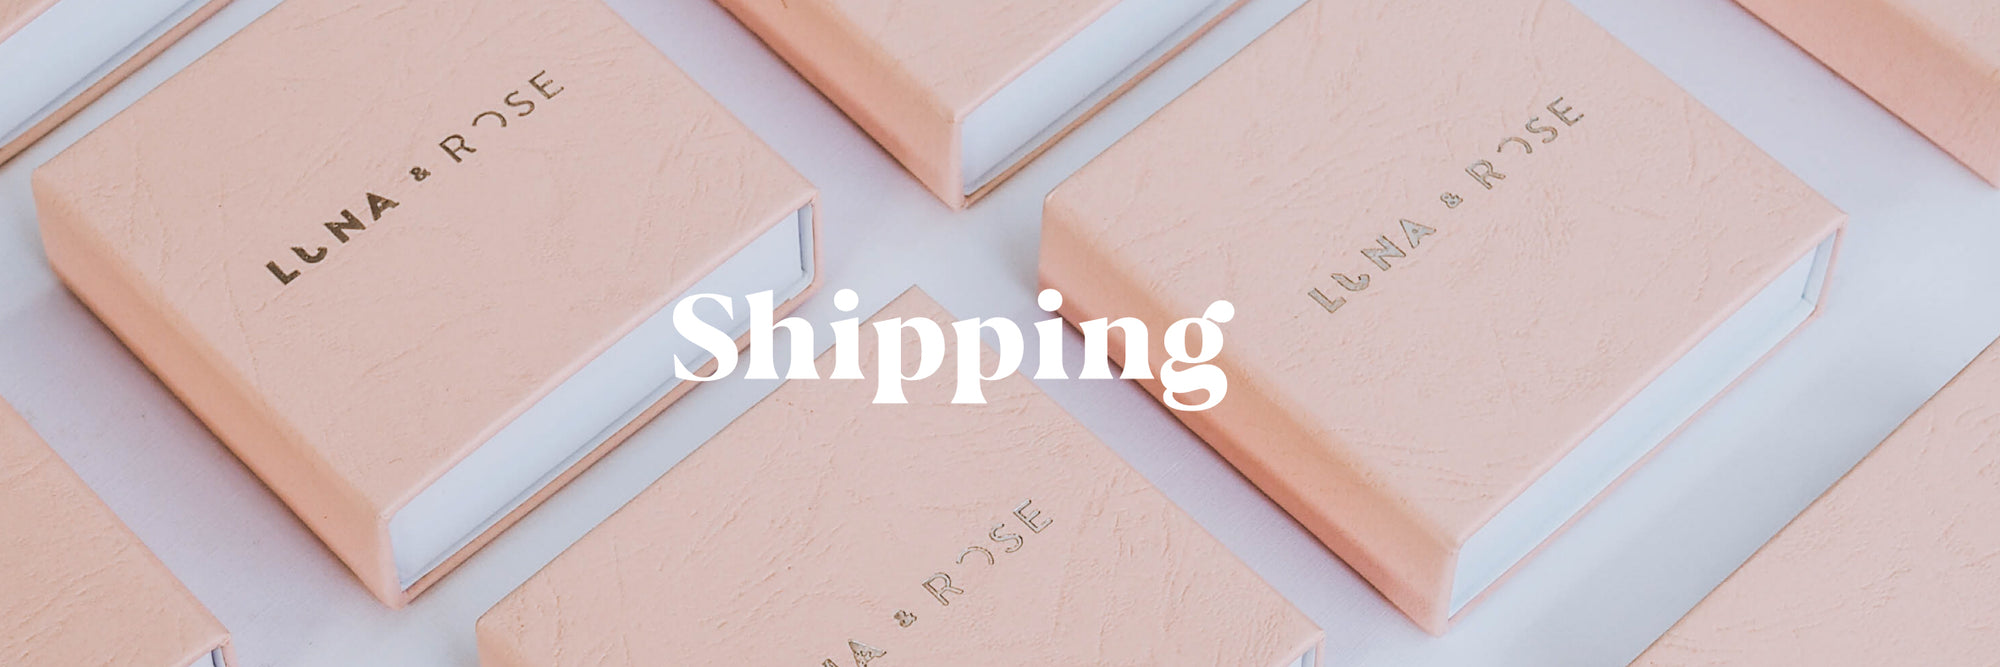 Luna & Rose Jewellery and Apparel Shipping information page for customers